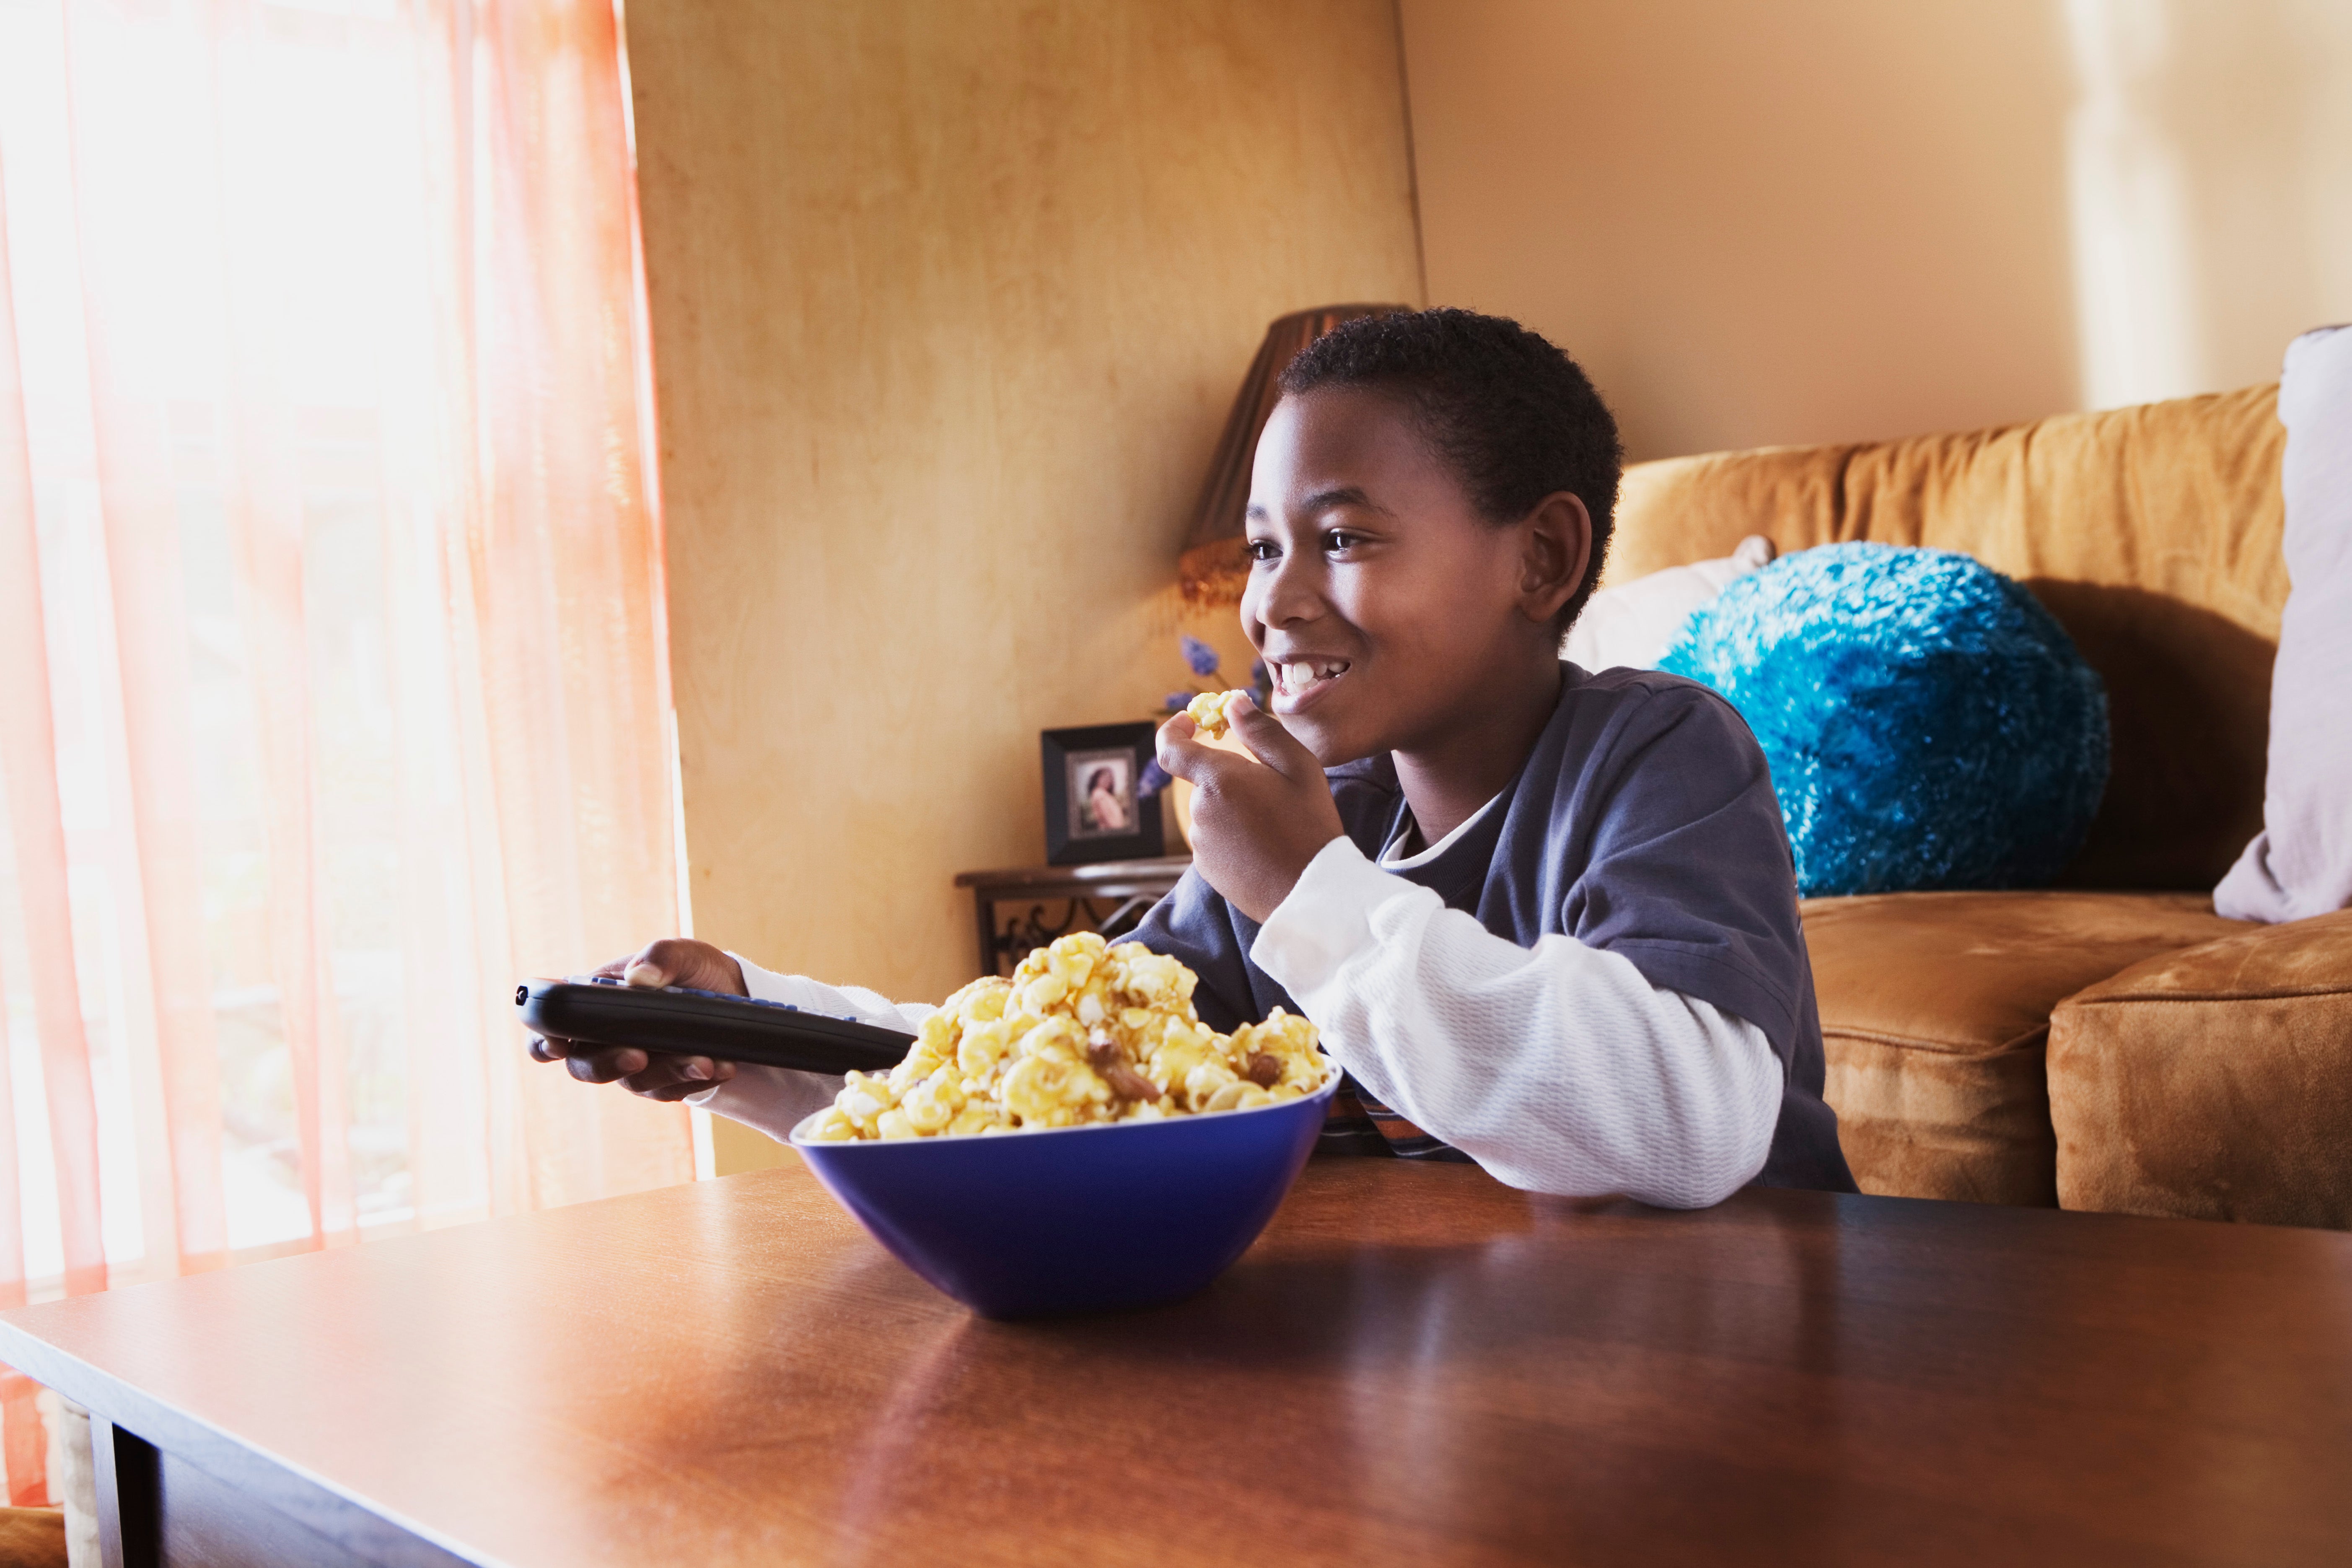 No Surprise Here: Research Shows Some Junk Food Ads Disproportionately Target Black Children
